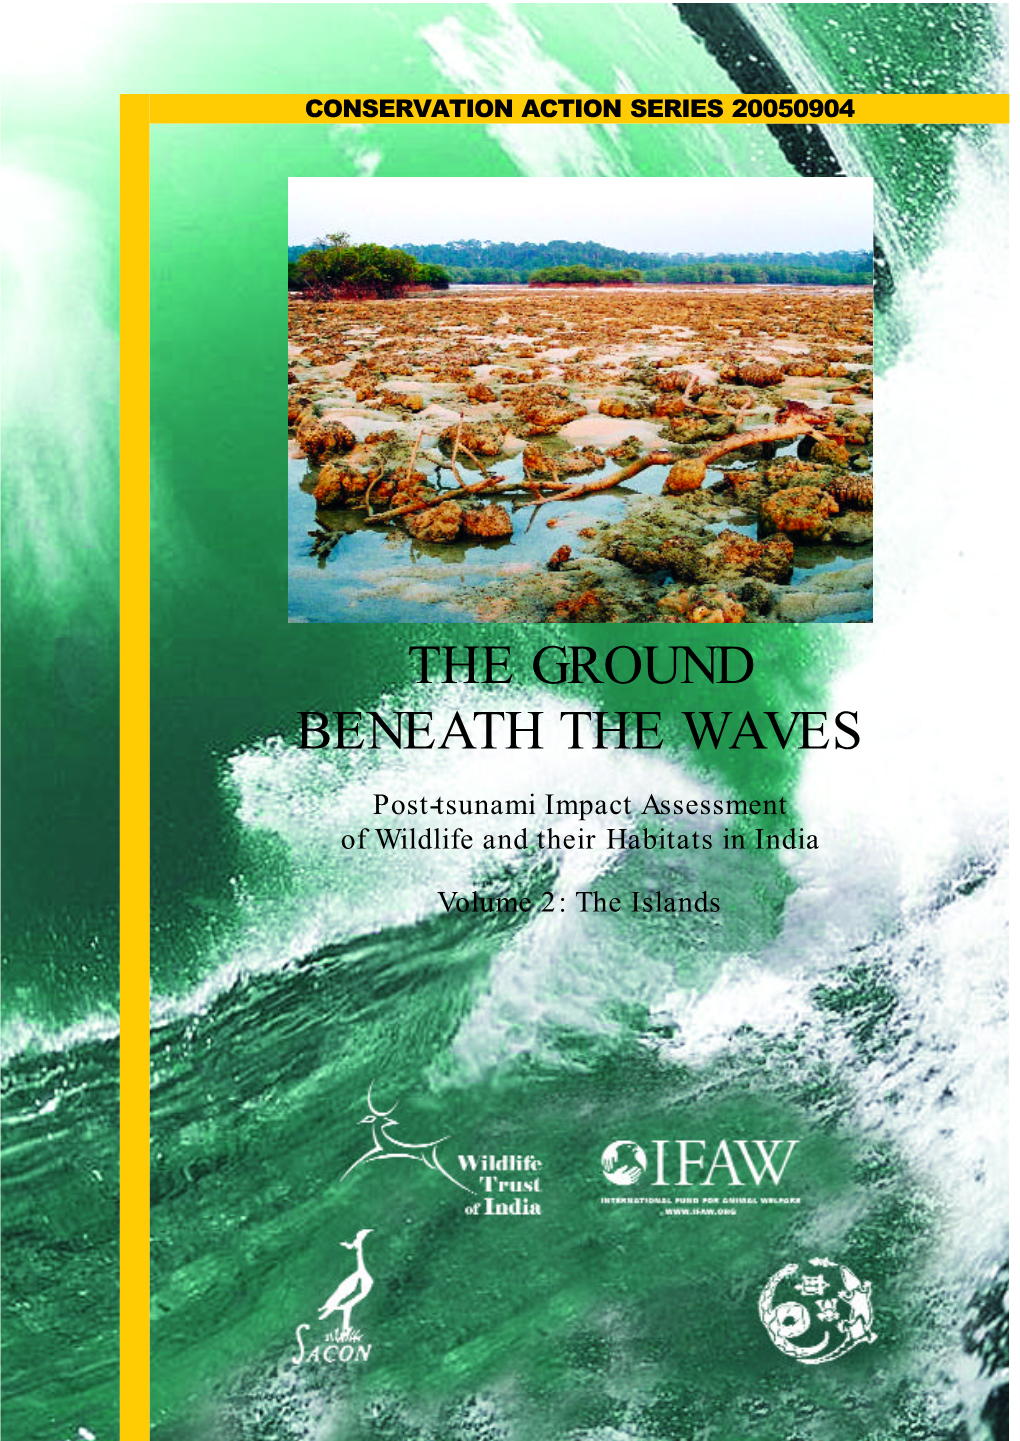 THE GROUND BENEATH the WAVES Post-Tsunami Impact Assessment of Wildlife and Their Habitats in India